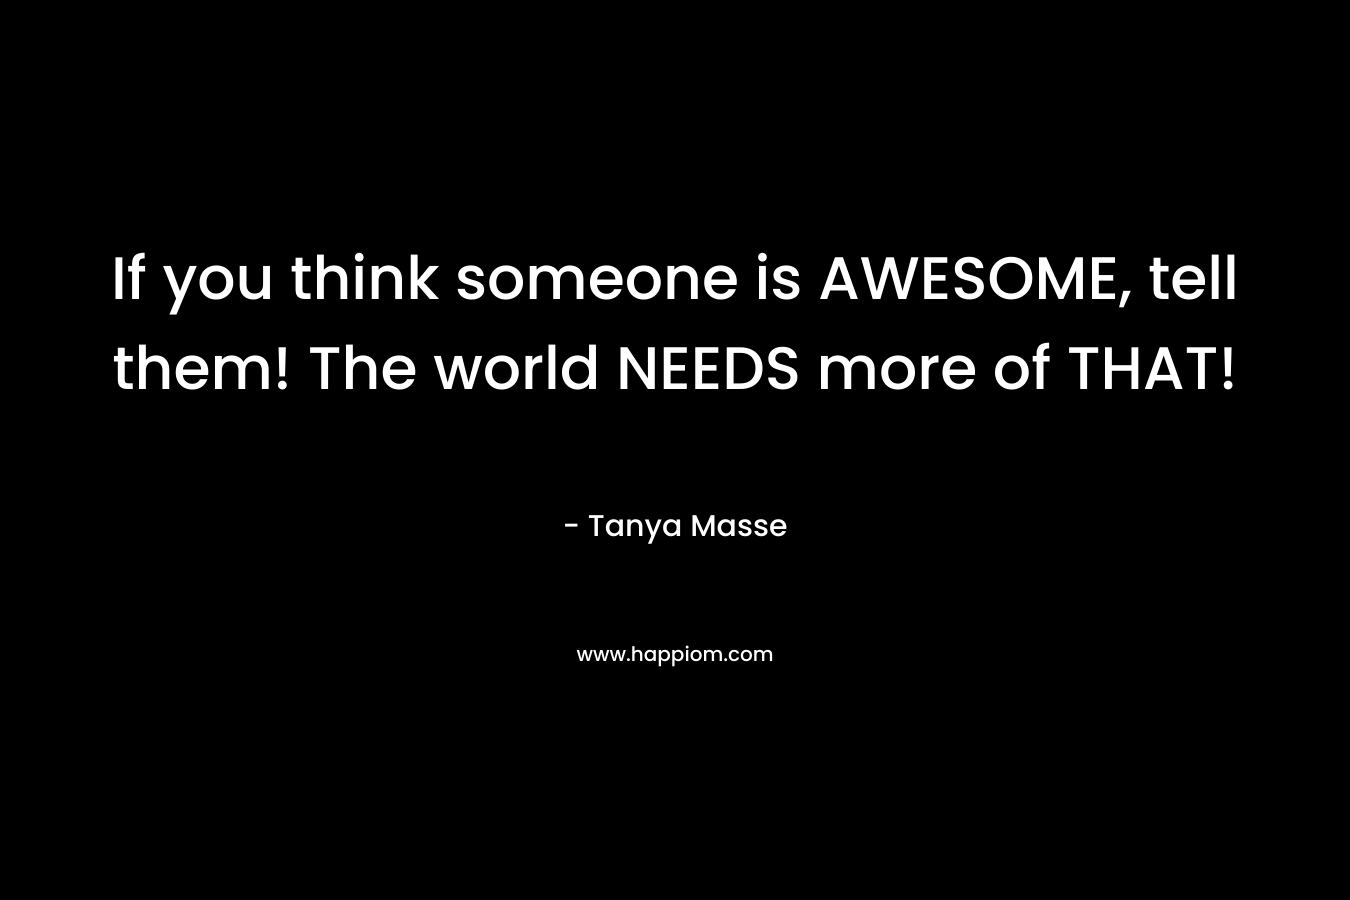 If you think someone is AWESOME, tell them! The world NEEDS more of THAT!